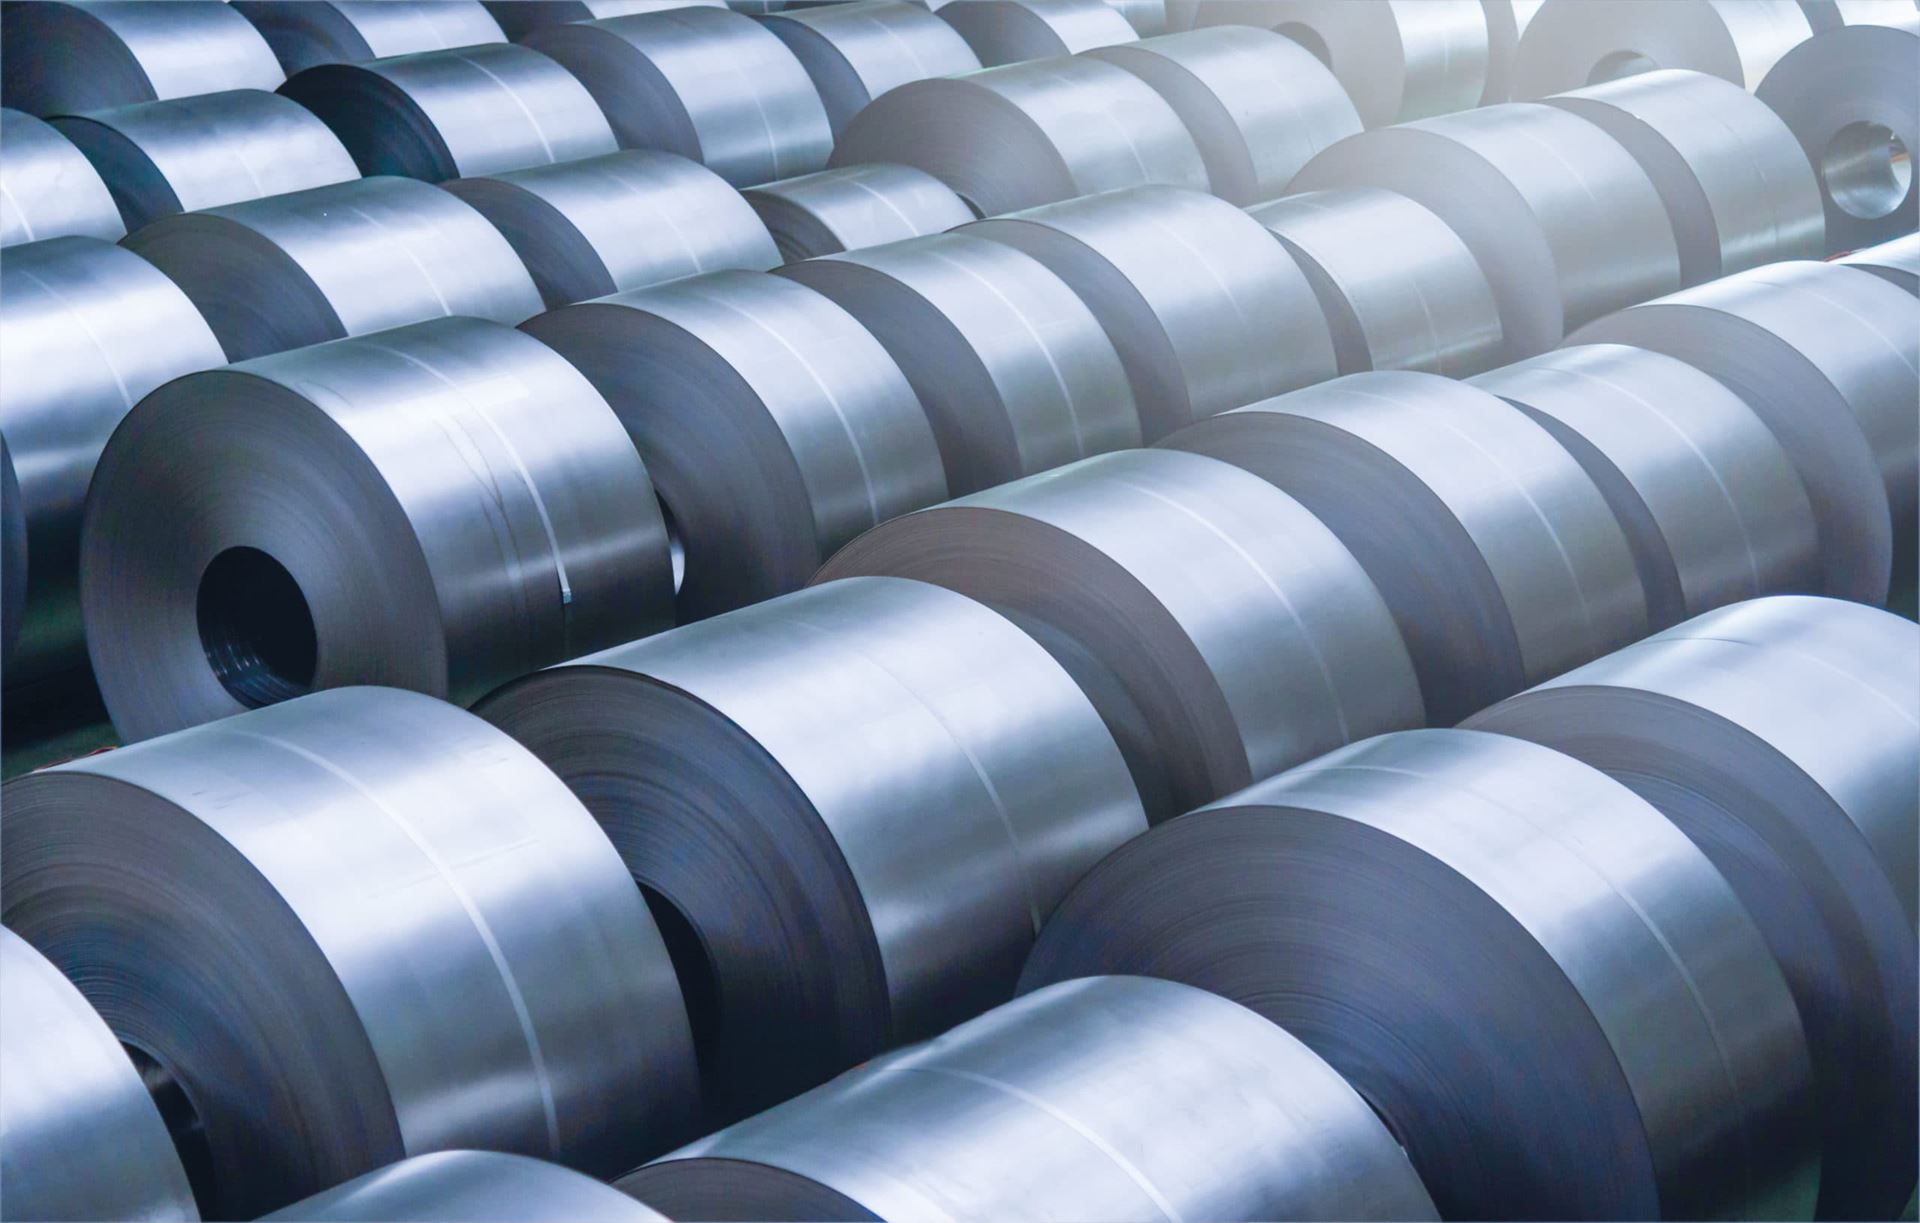 China has reduced its imports of stainless steel 